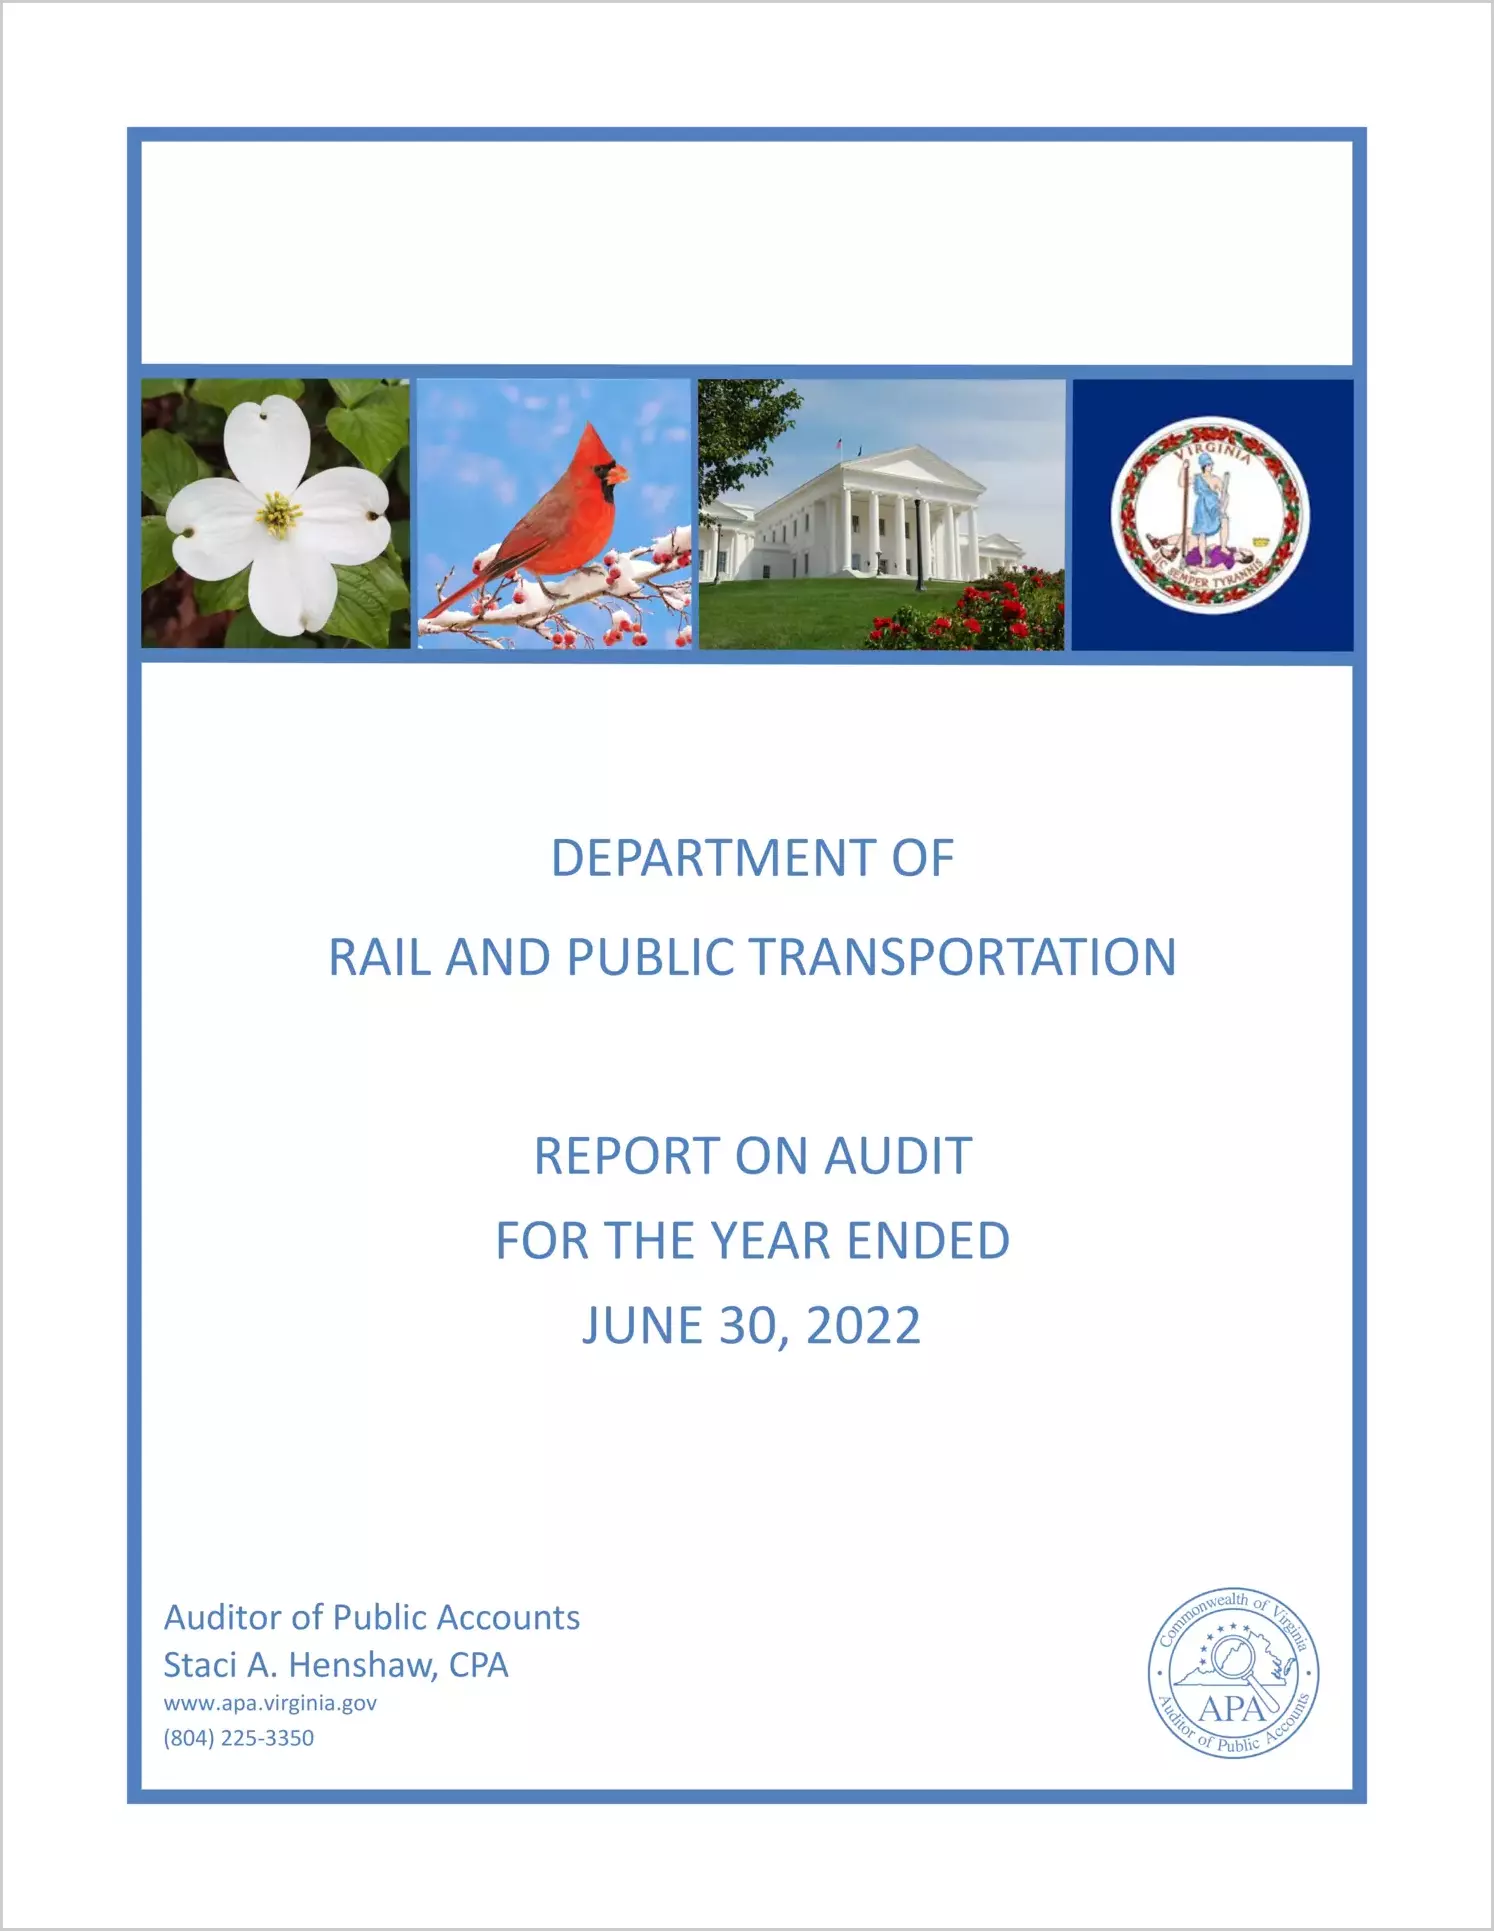 Department of Rail and Public Transportation for the year ended June 30, 2022